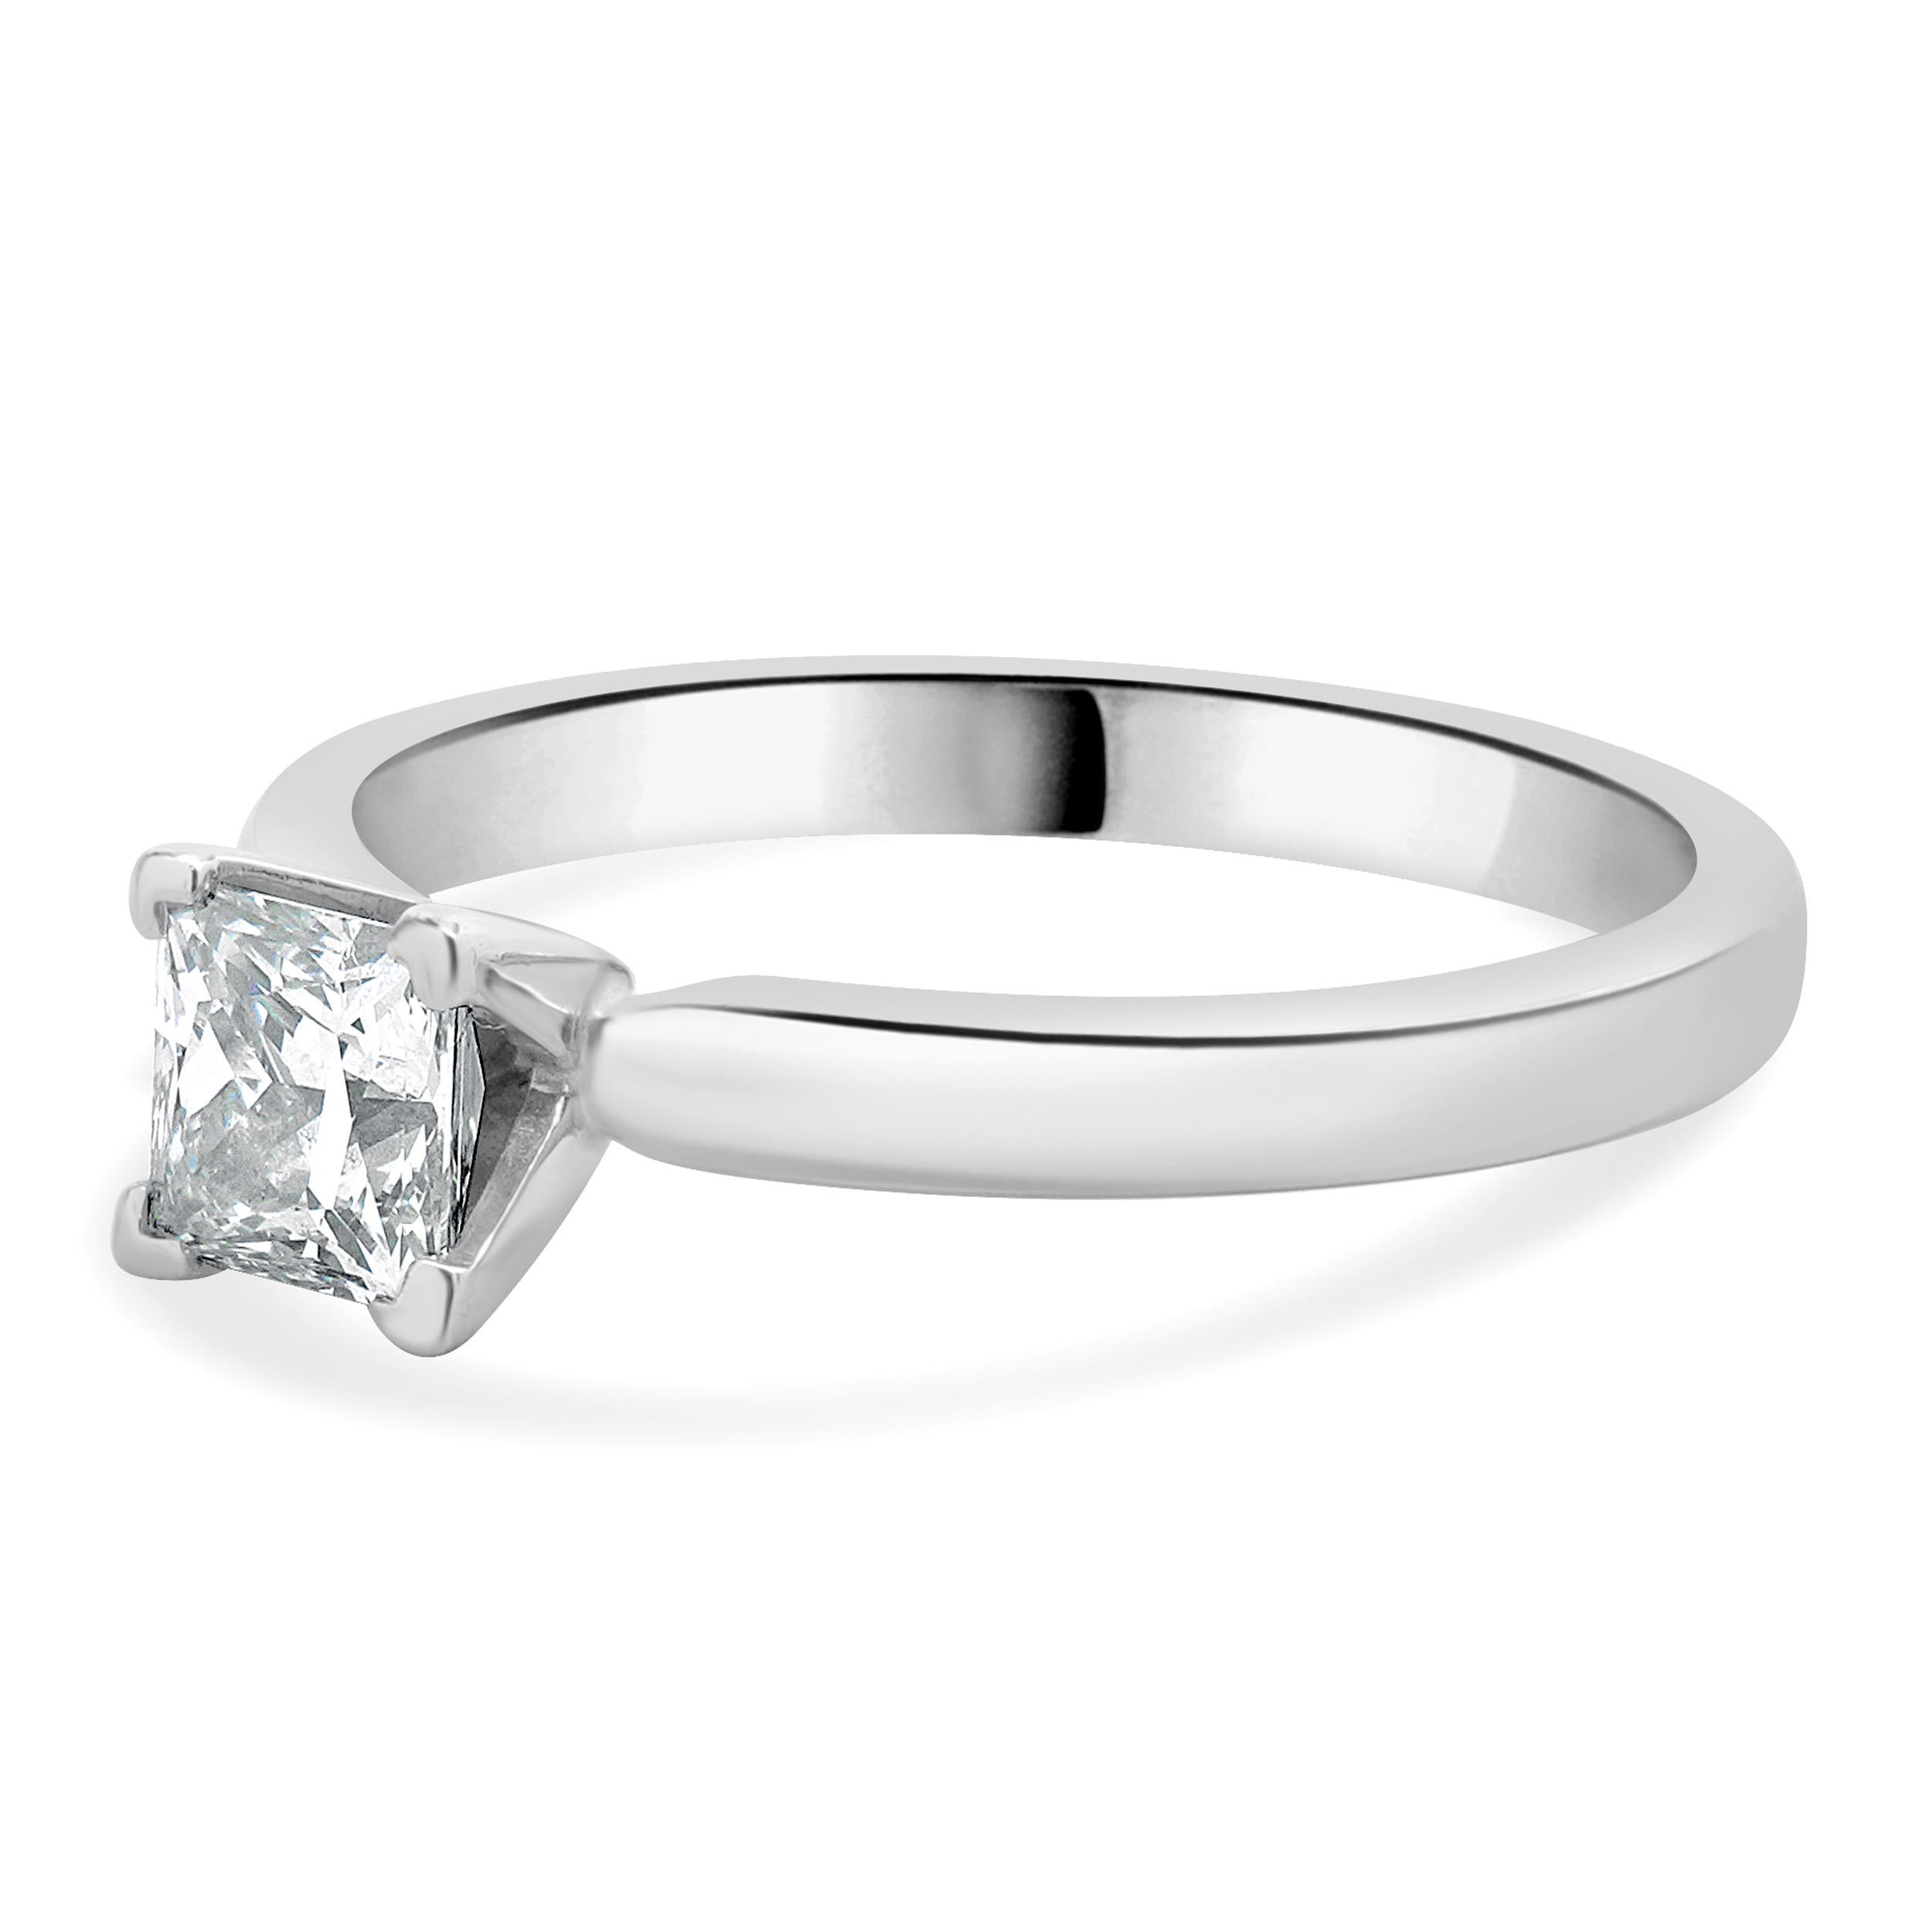 Designer: custom
Material: 18K white gold and platinum
Center Diamond: 1 princess cut = 0.83ct
Color : I
Clarity : VS2
AGS: 0009498603
Dimensions: ring top measures 5.5mm
Size: 8 complimentary sizing available 
Weight: 4.57 grams
